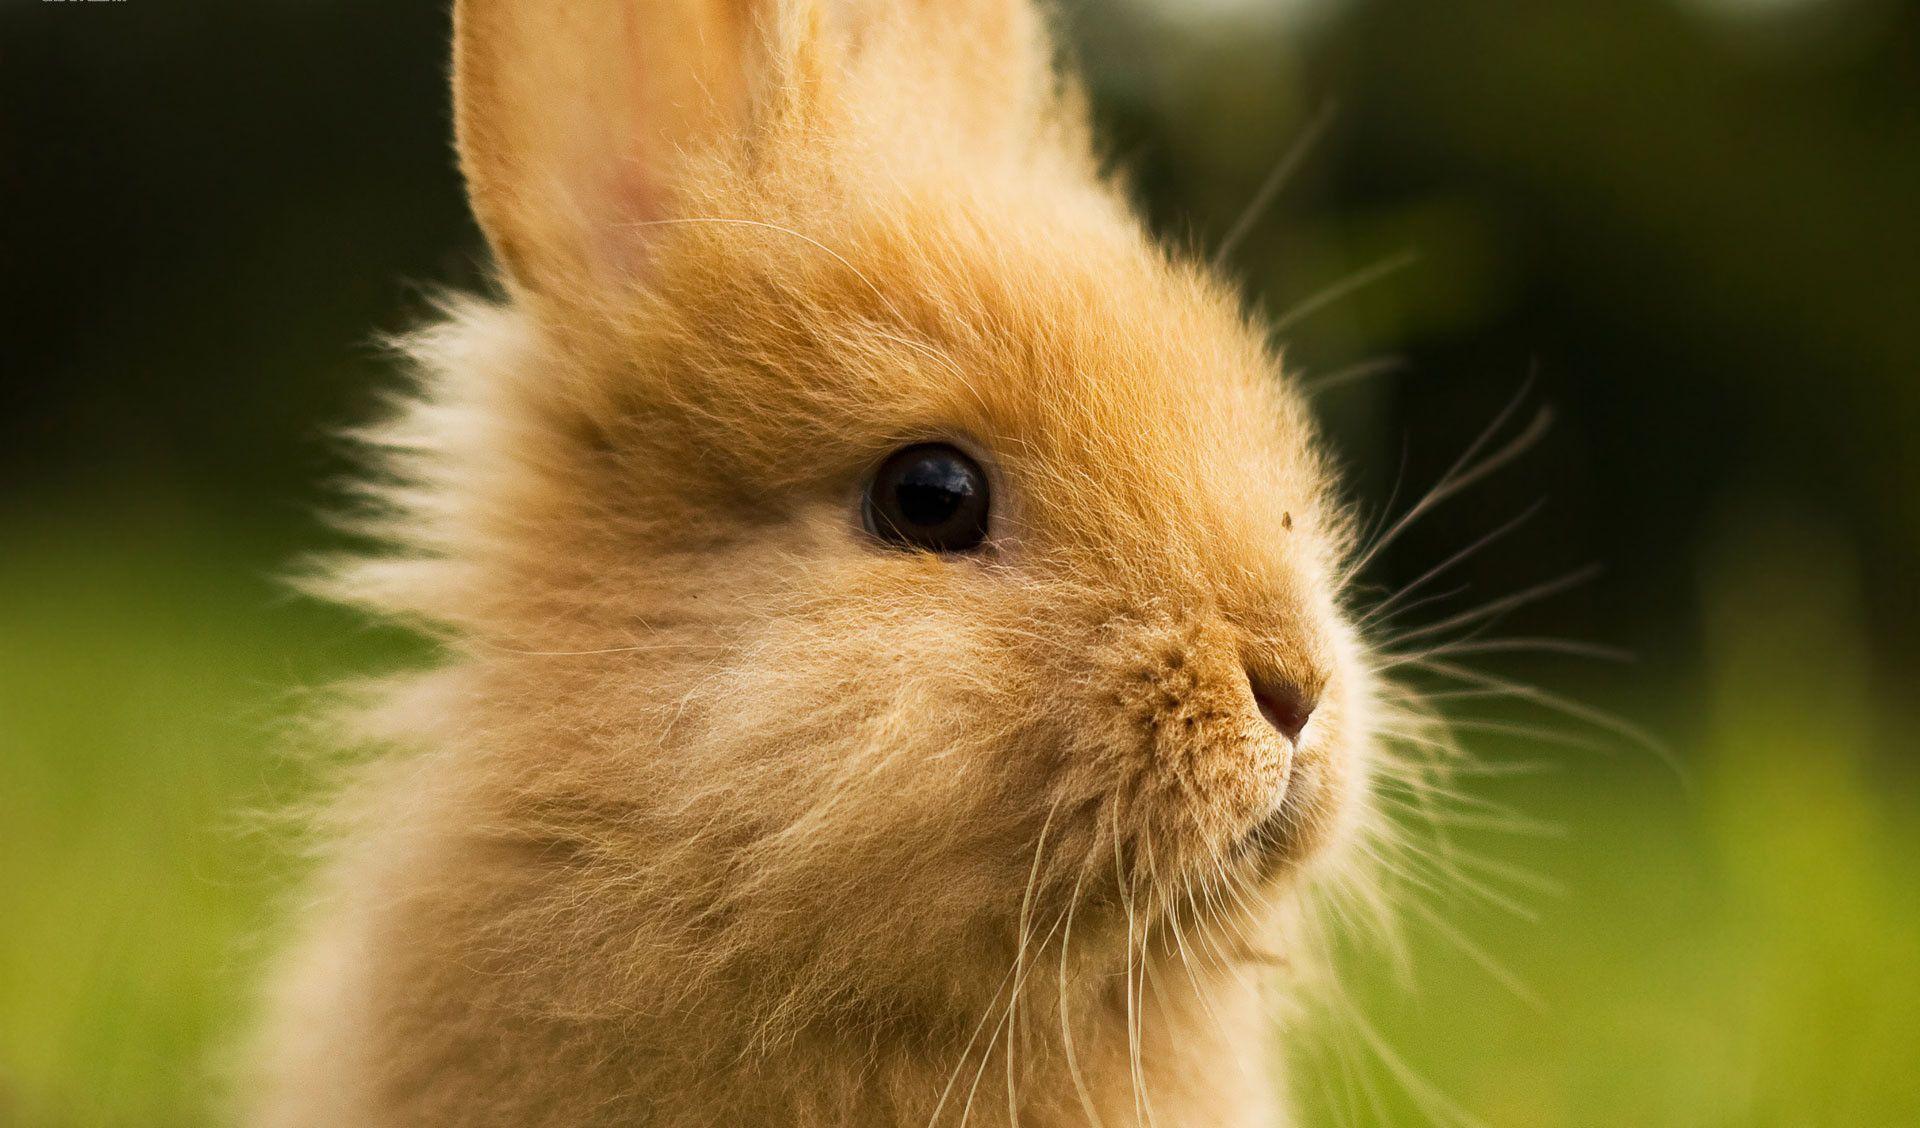 Cute Bunny Rabbit Cool HD Wallpaper Picture on ScreenCrot